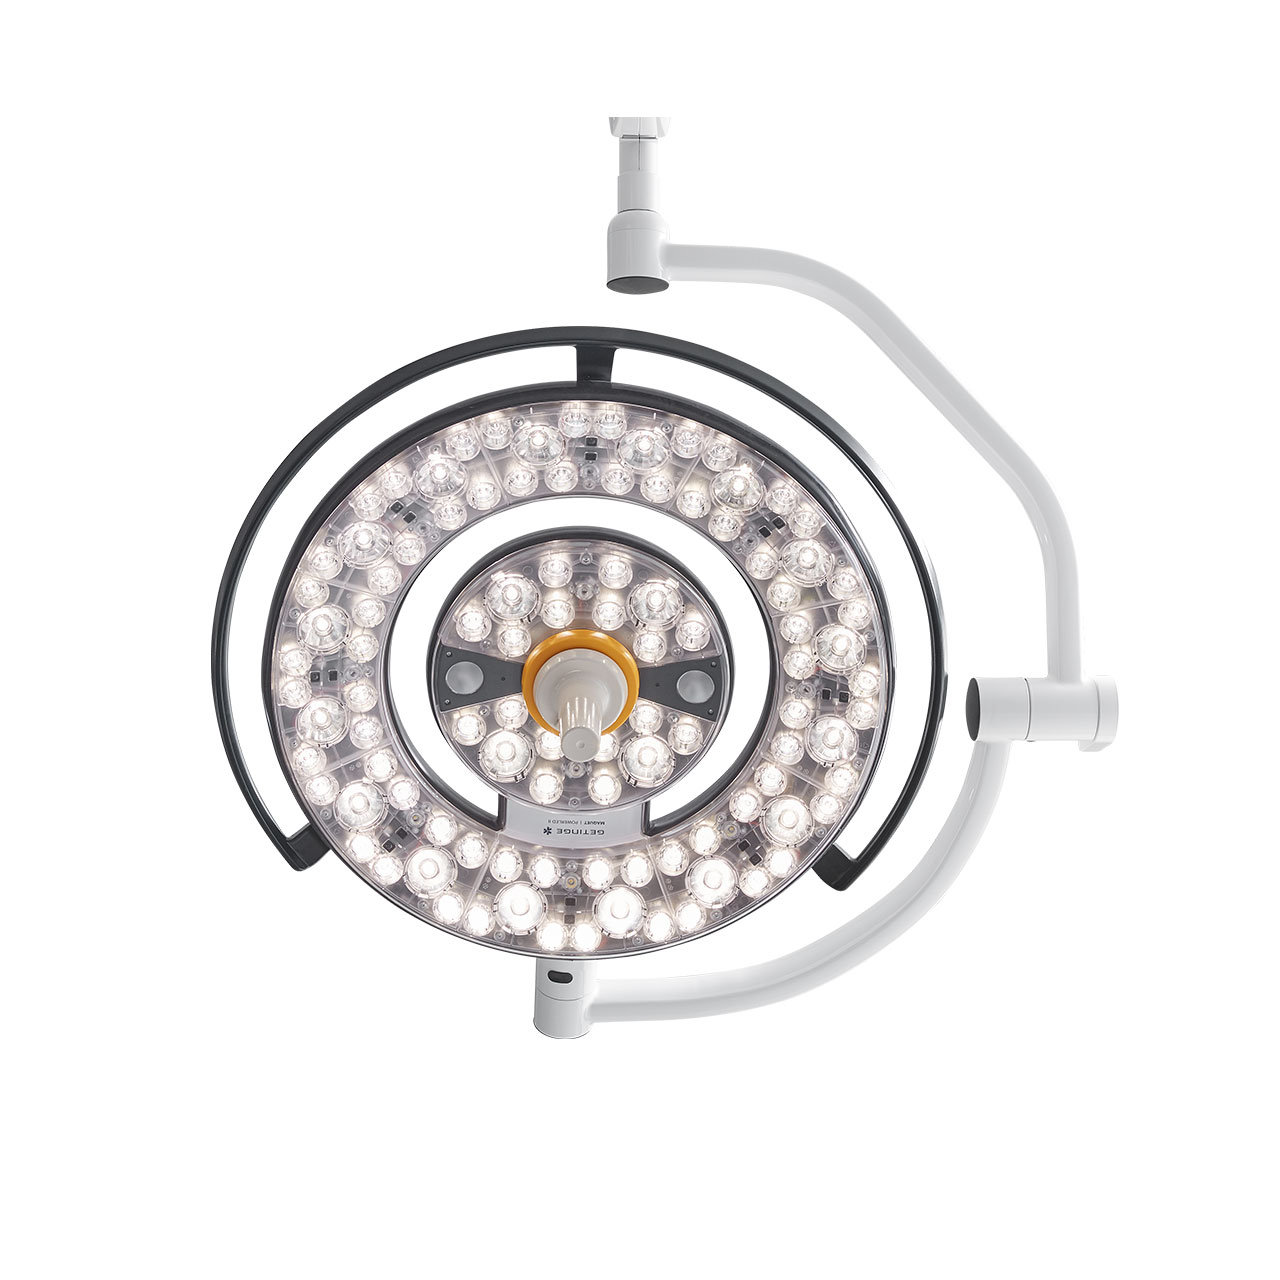 High-quality surgical light illumination helps to relieve strain, ensure confident assessment, and minimize distractions to return the surgeon’s full attention to the patient.